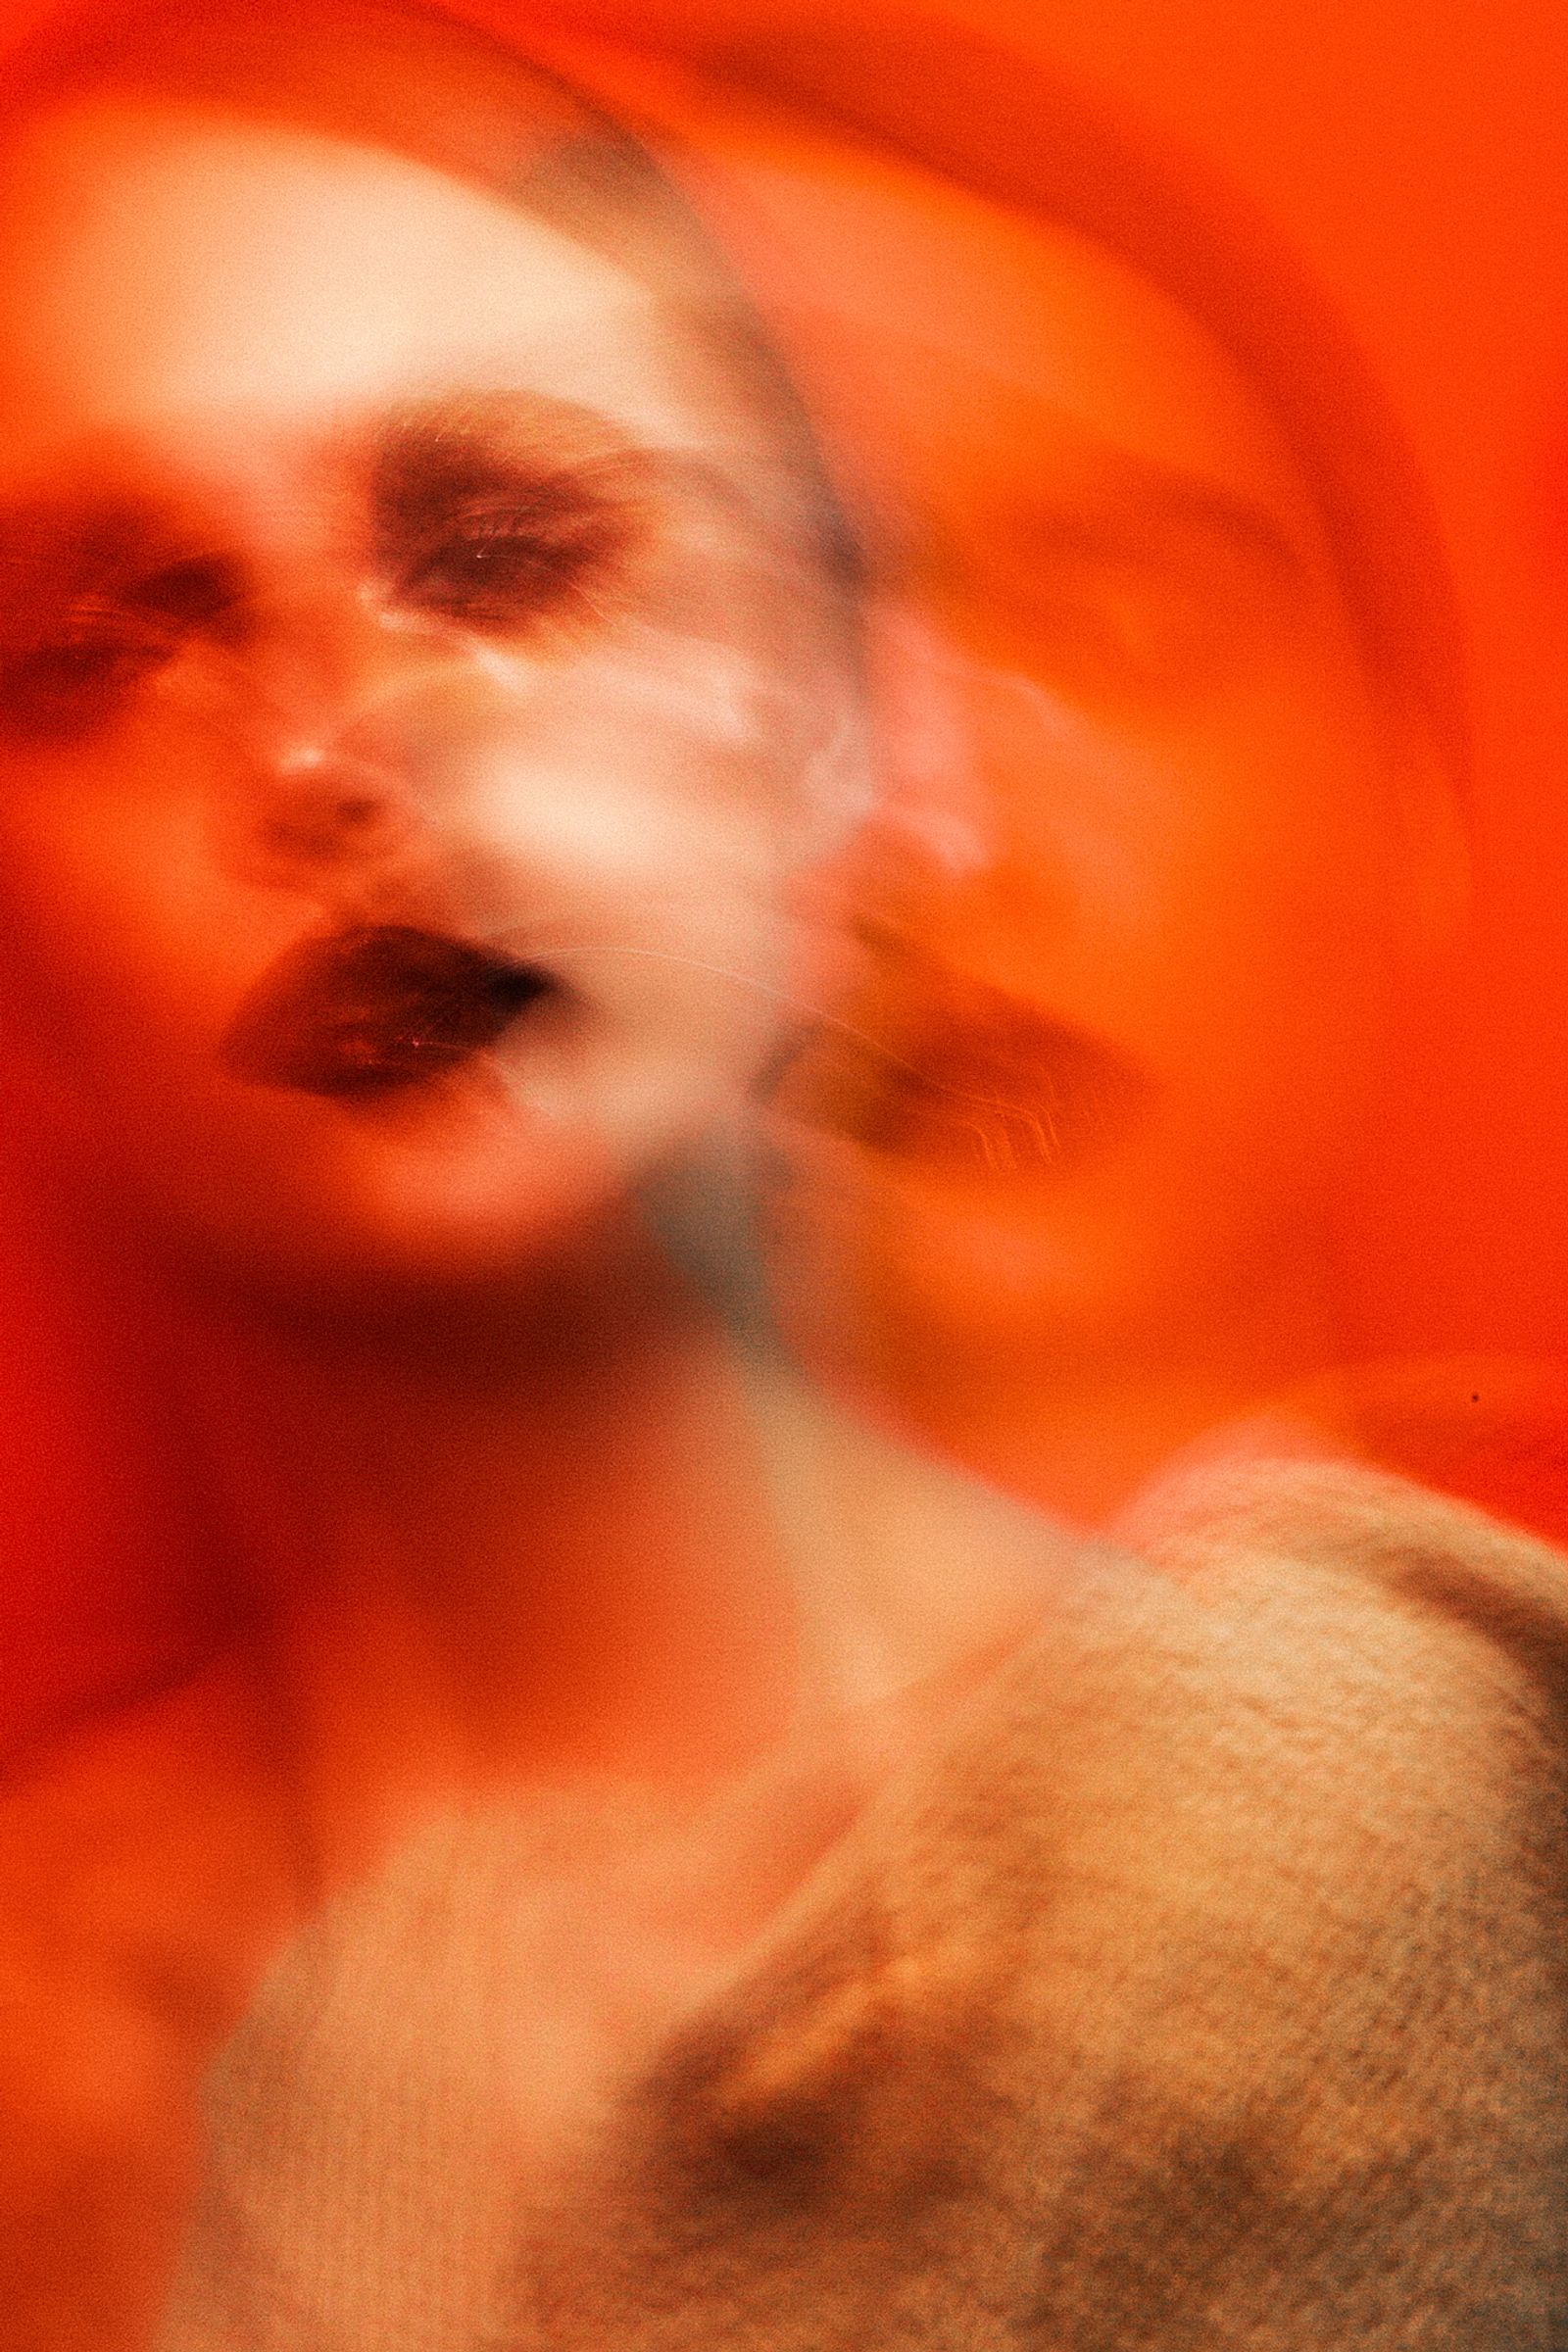 © Victoria Viprada Balaban - Image from the Color Therapy photography project